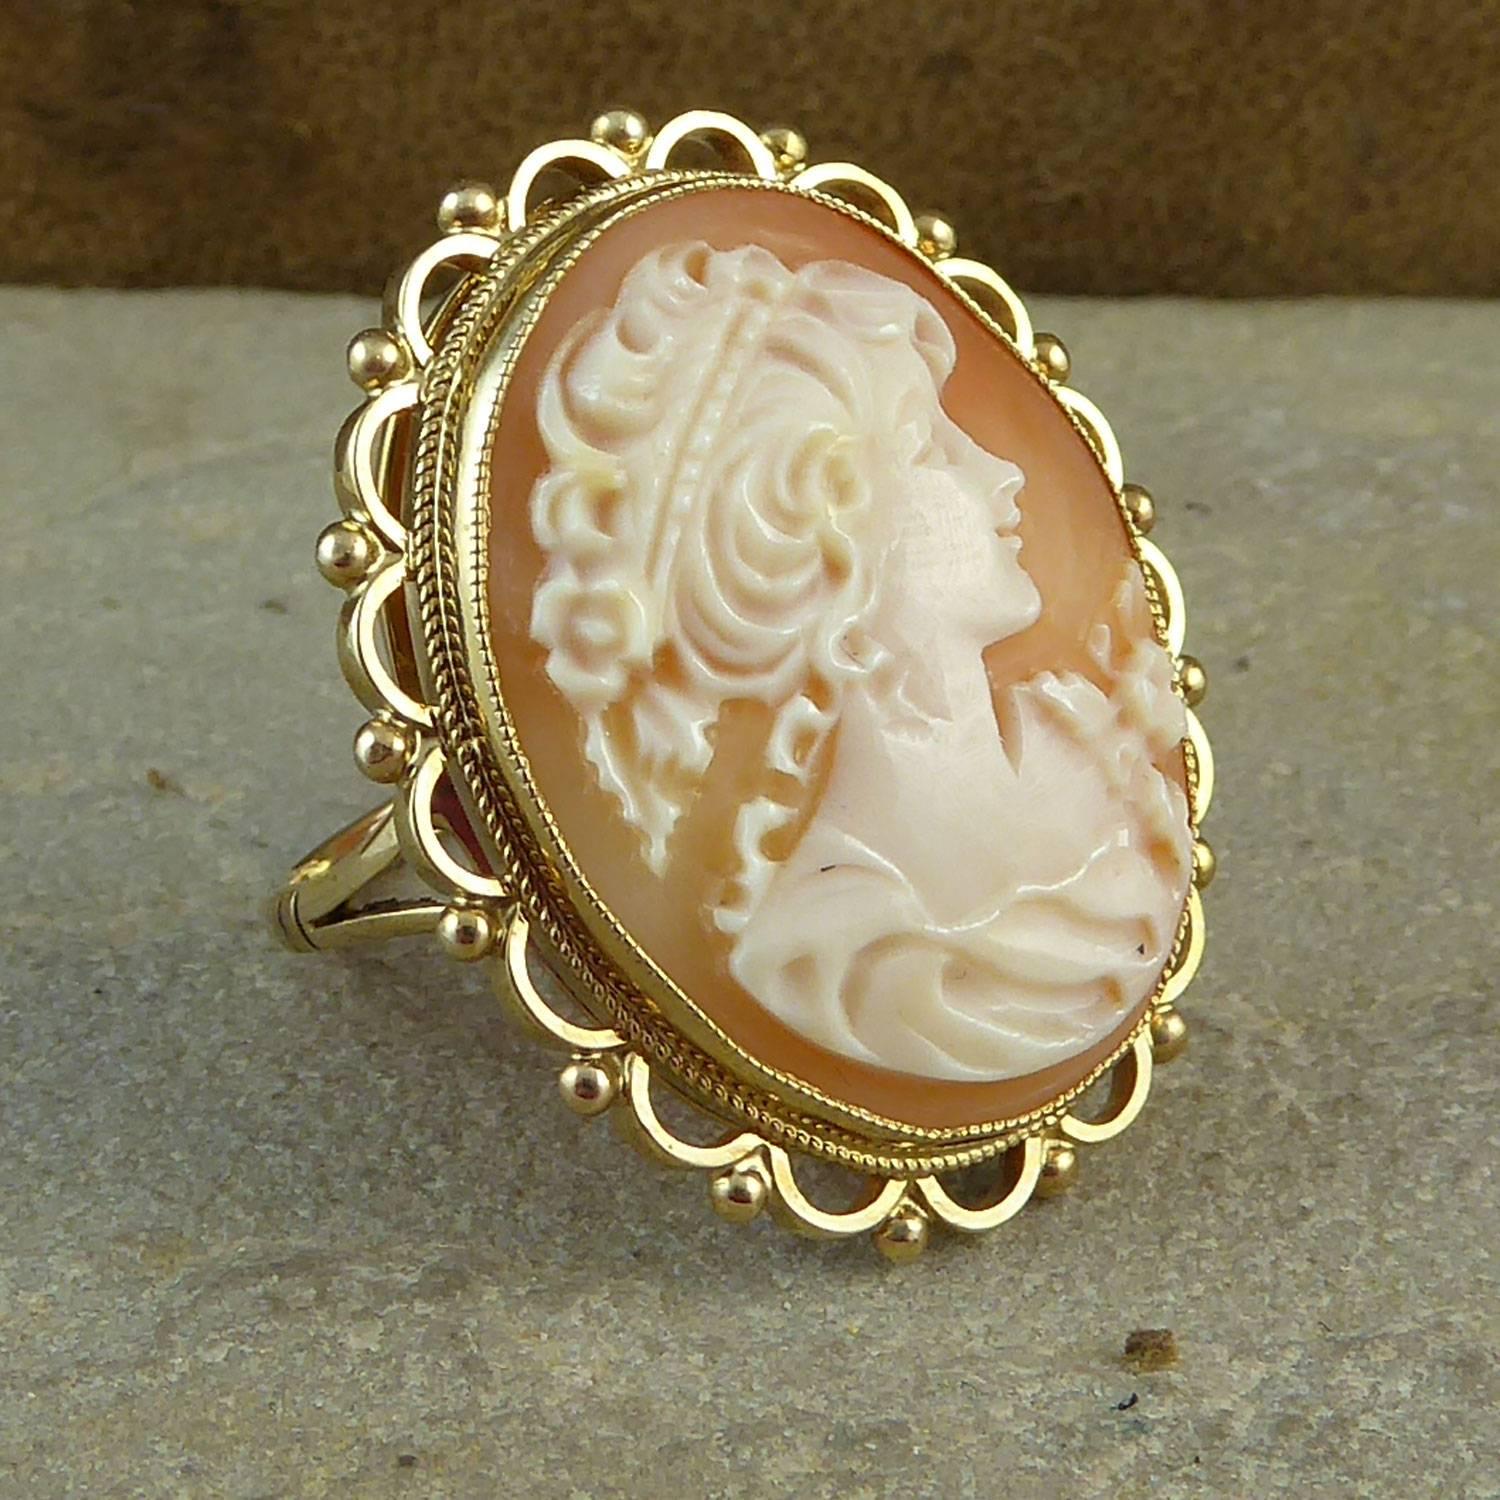 A pretty vintage cameo mounted in a ring setting and creating a ring of quite impressive size.   The cameo has been carved to show a pretty young woman with a a flowing up-style hair-do and a flower pinned to her dress.  The setting in yellow gold